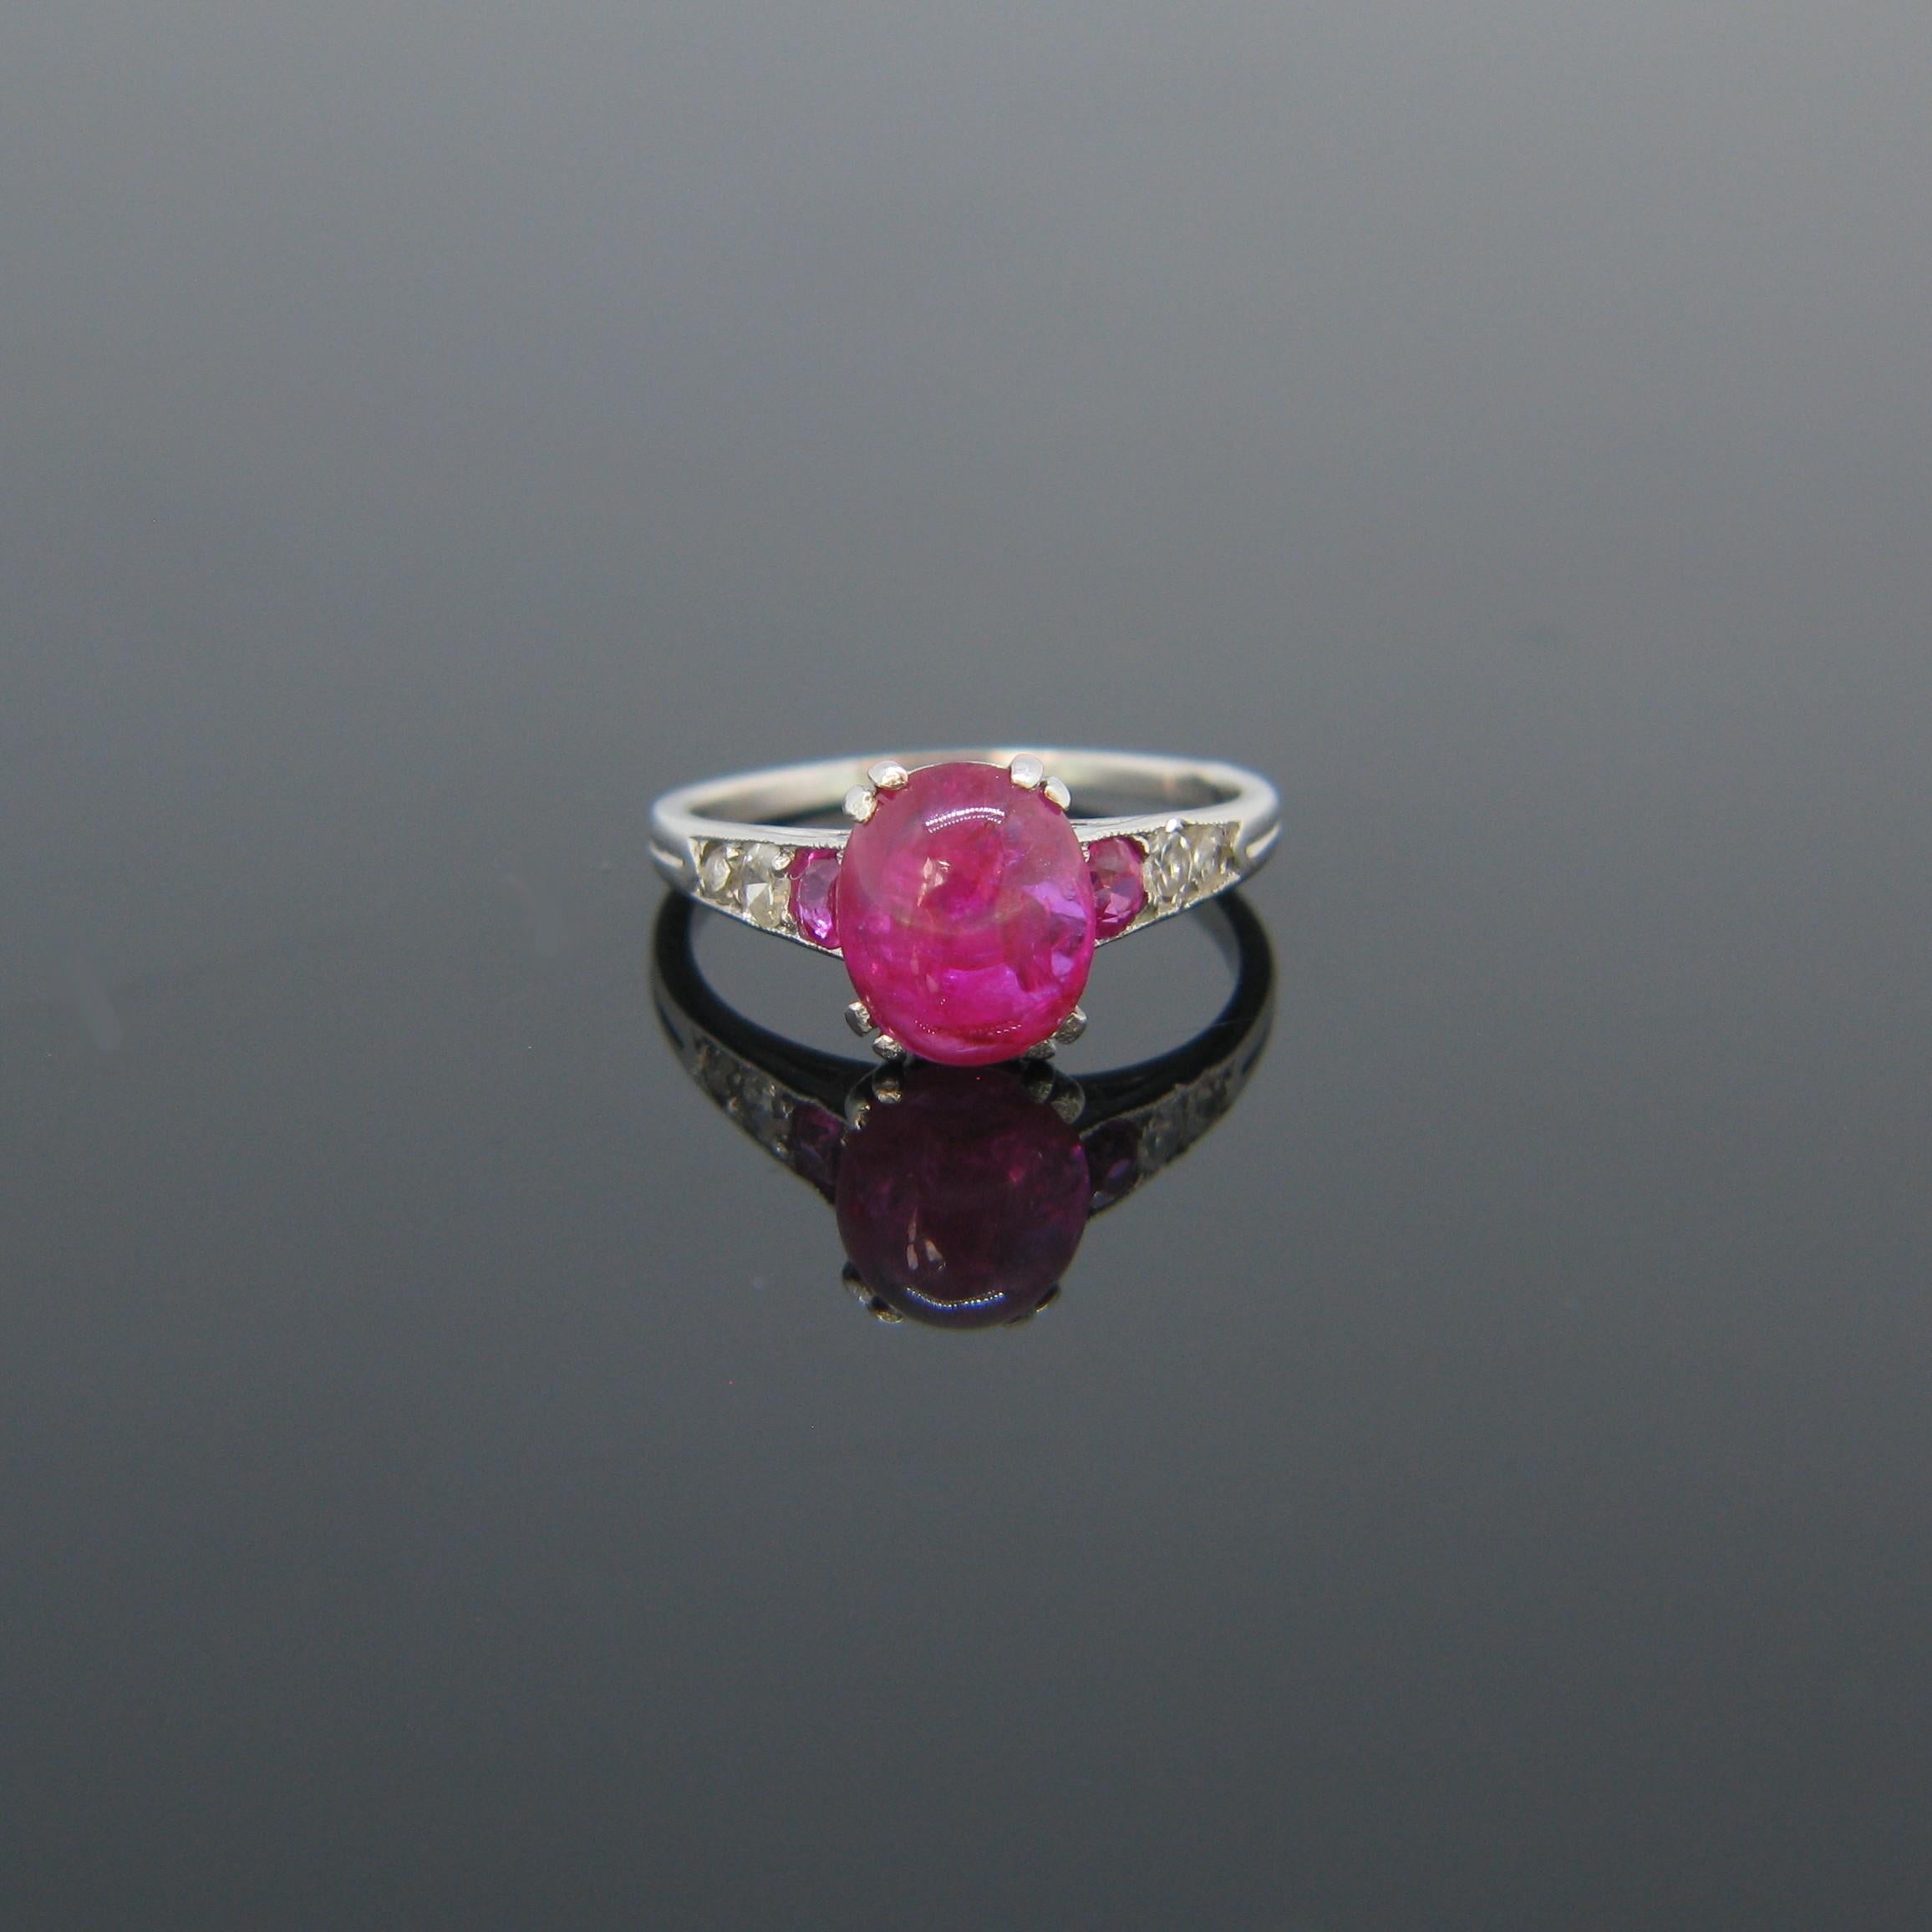 This beautiful Art Deco era is fully made in platinum. It is set with a cabochon ruby (no indications of heating) and is adorned on the sides with 4 single cut diamonds and two additional rubies. The ruby has a vibrant pink colour. It is a truly